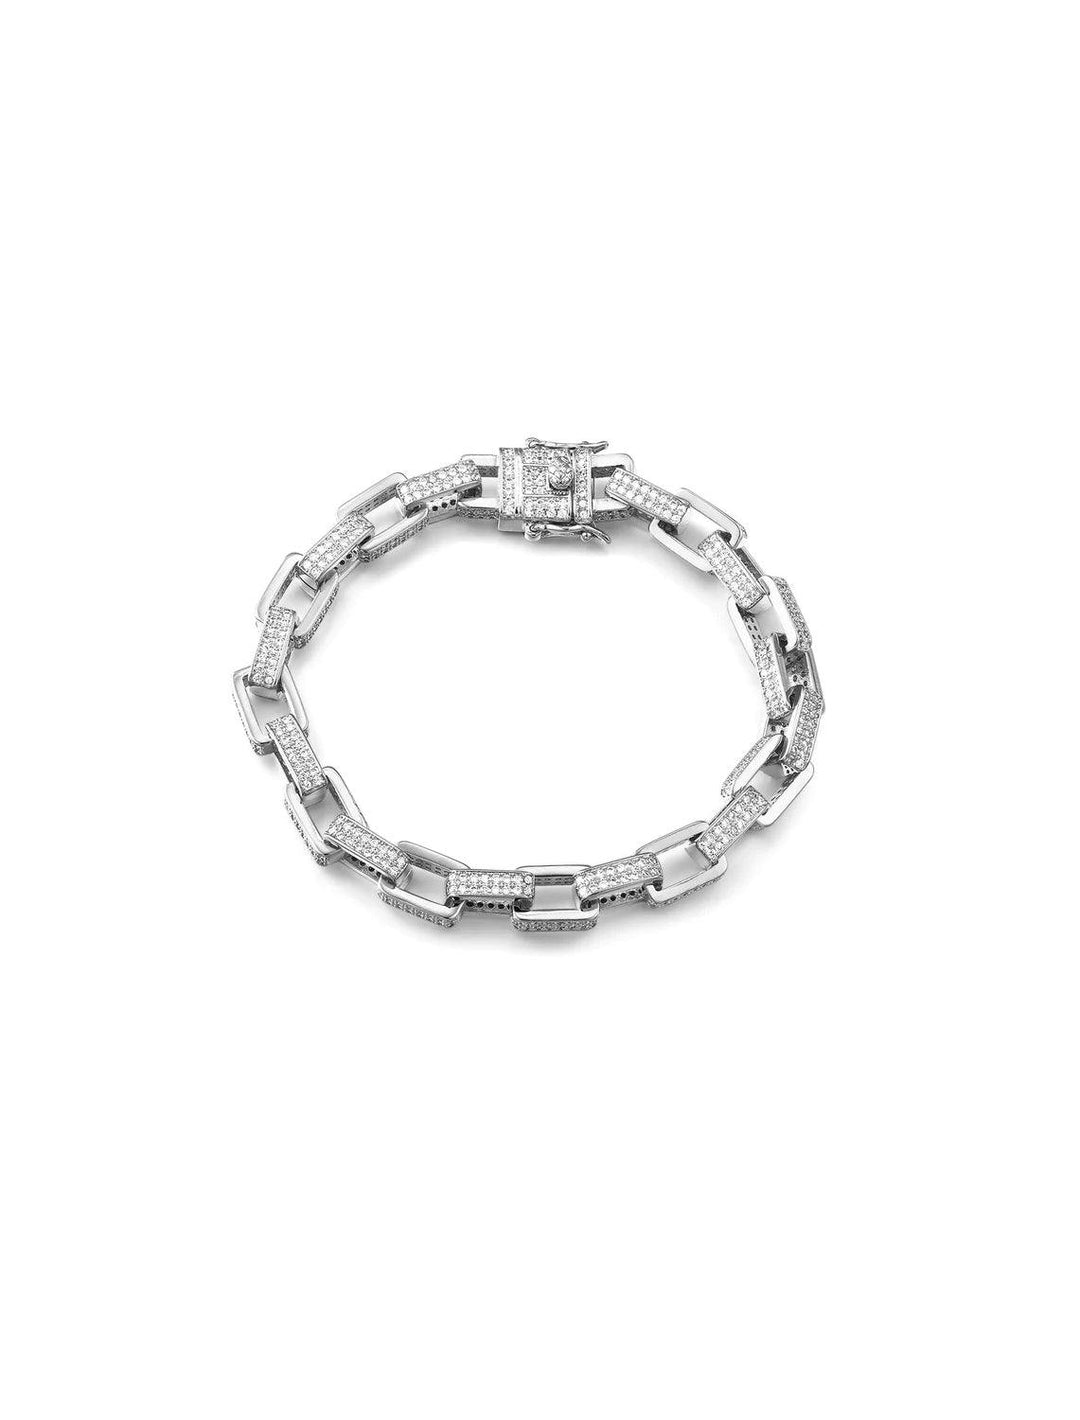 Overhead view of Luv AJ's boxy pave chain bracelet in silver.